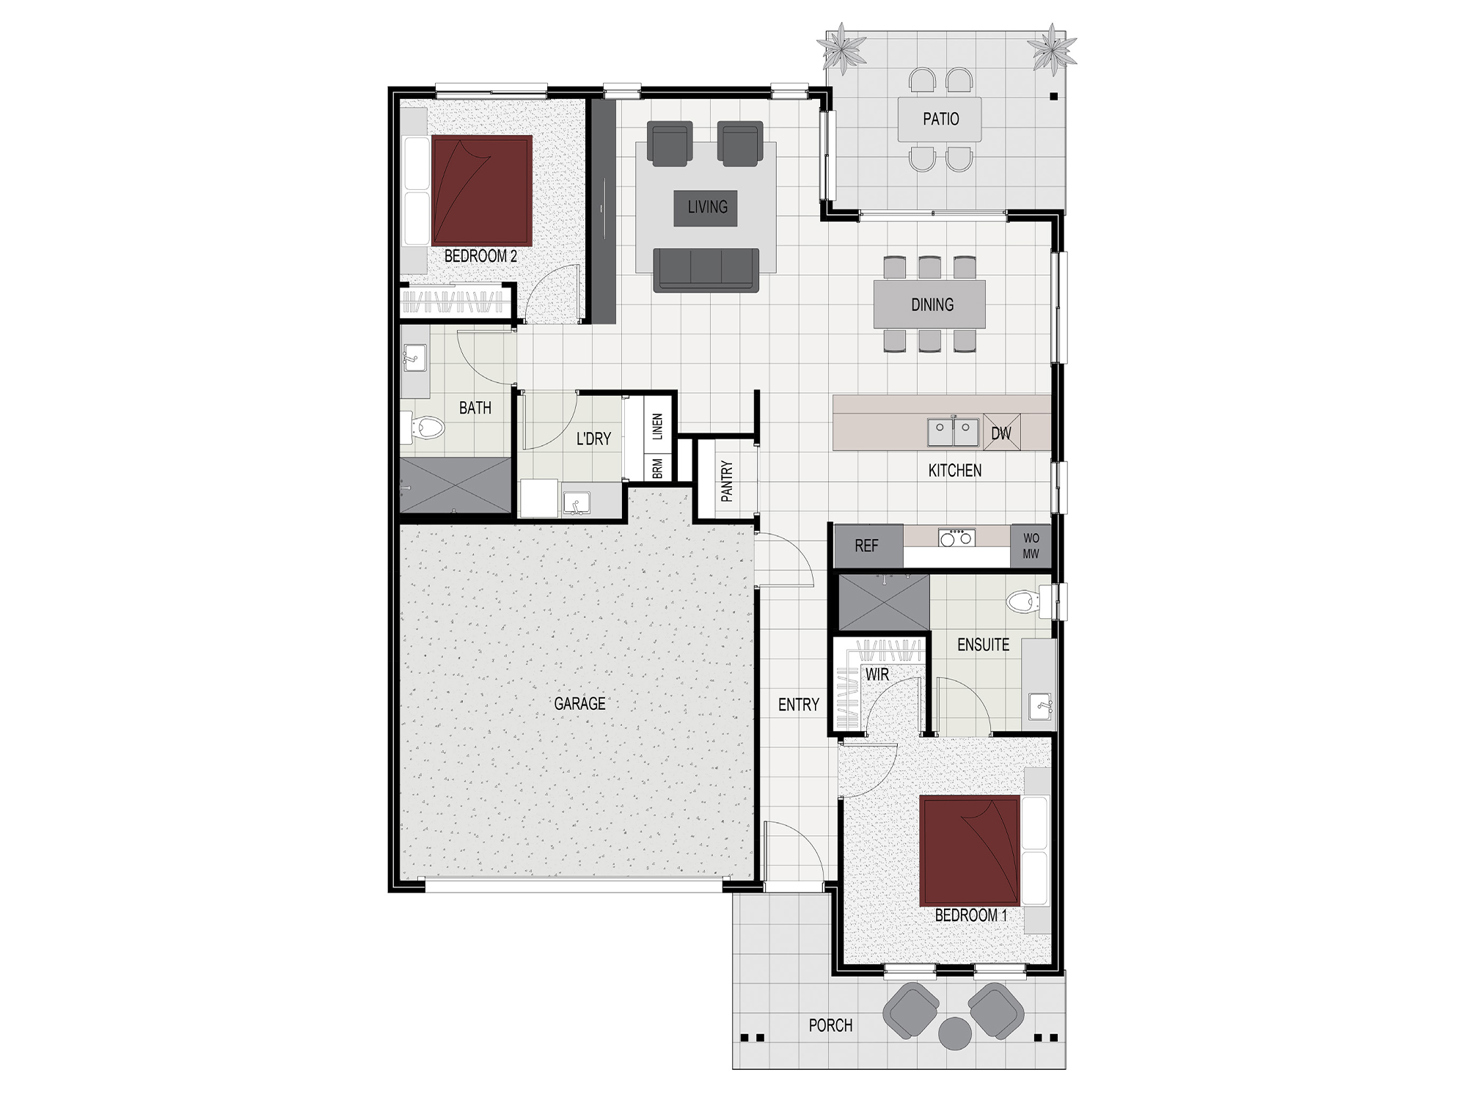 Floorplan of the Beechmont house design with a Gable facade located at Stockland Halcyon Rise, Logan Reserve.